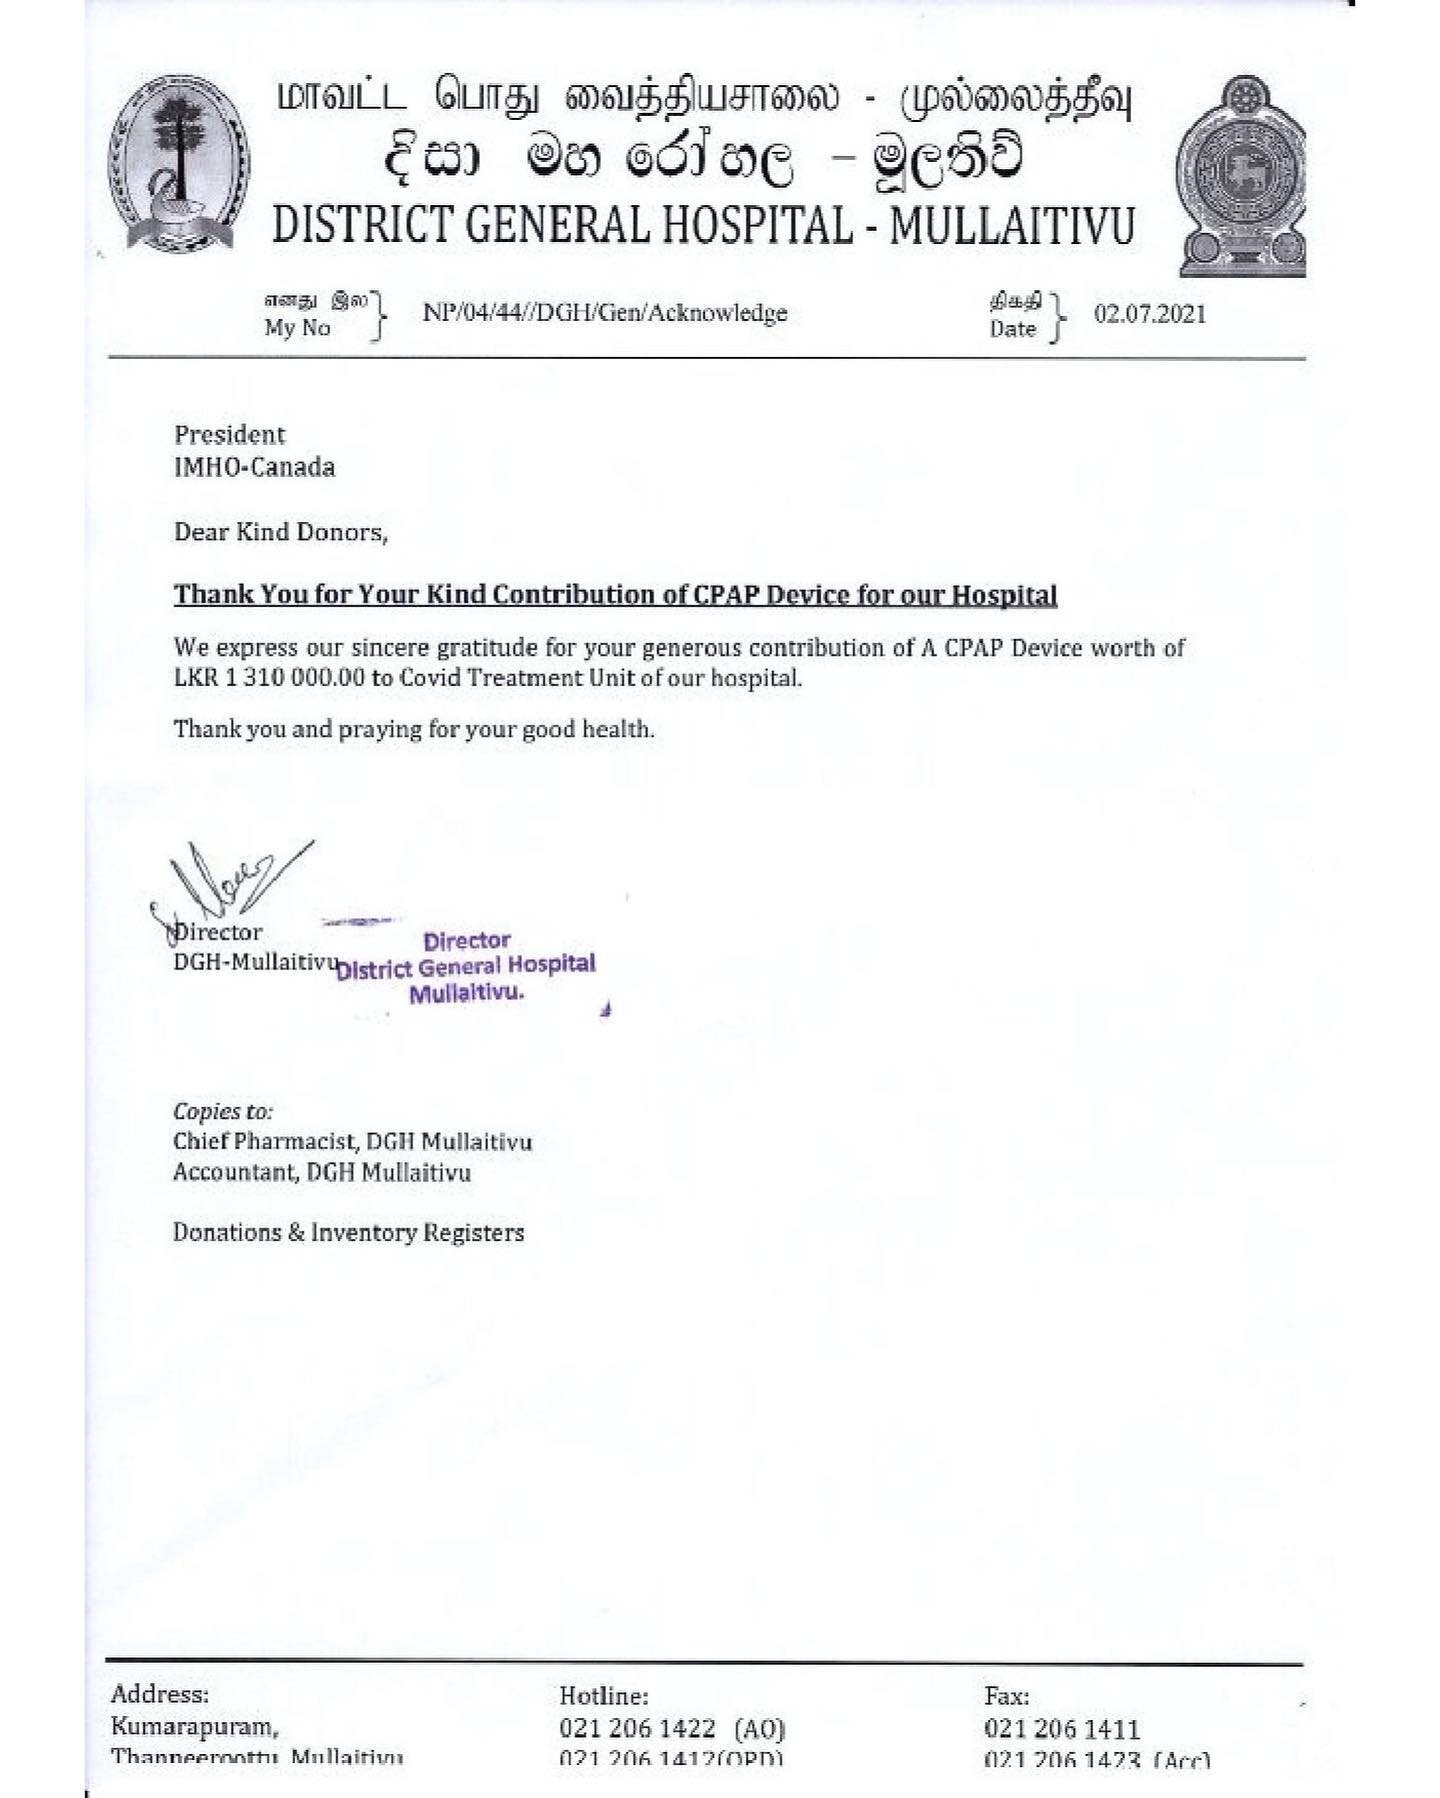 From the generous donations received, we were also able to support a second hospital for our COVID19 relief request. Mullaitivu District General Hospital in Mullaitivu District has been supported with their request for a CPAP oxygen therapy device. 
